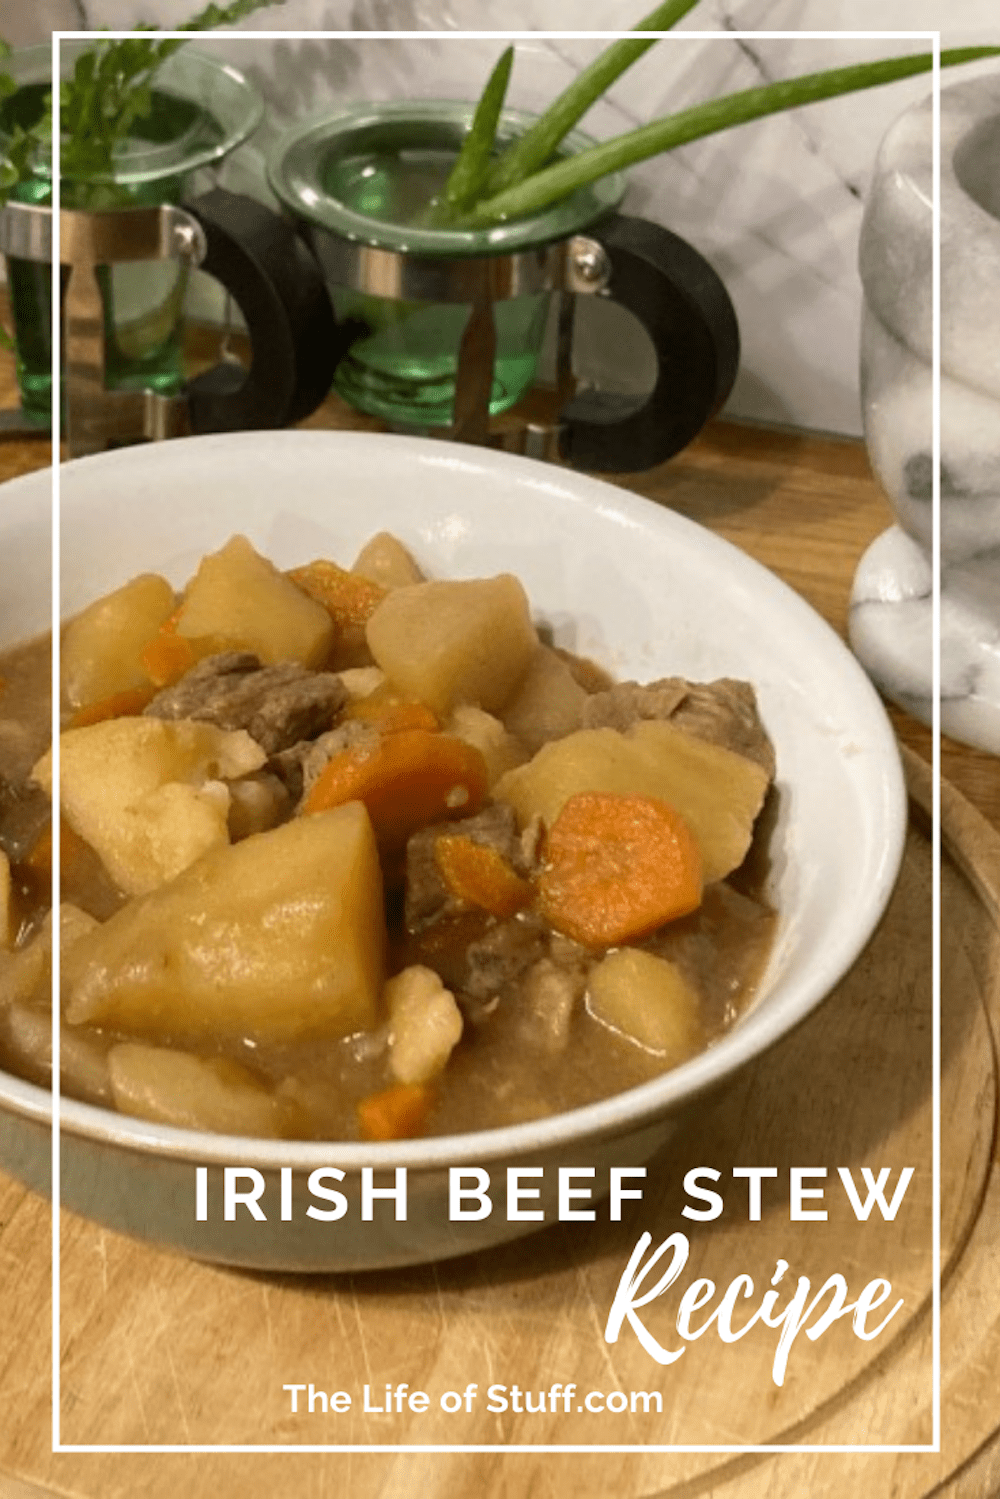 Delicious 1 Pot Oven Cooked Irish Beef Stew Recipe - The Life of Stuff